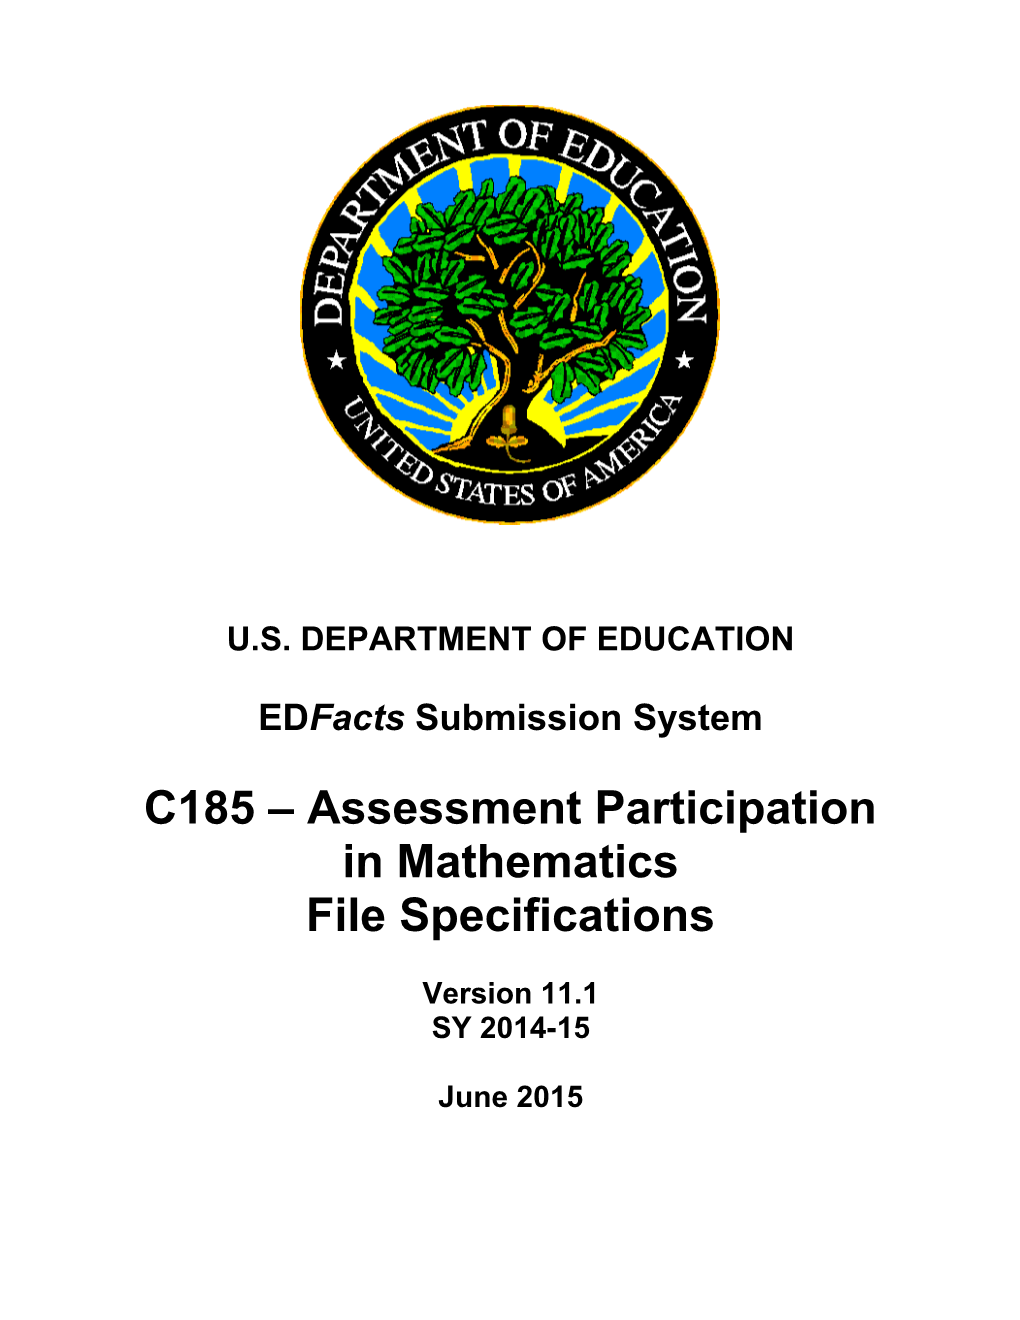 Assessment Participation in Mathematics File Specifications